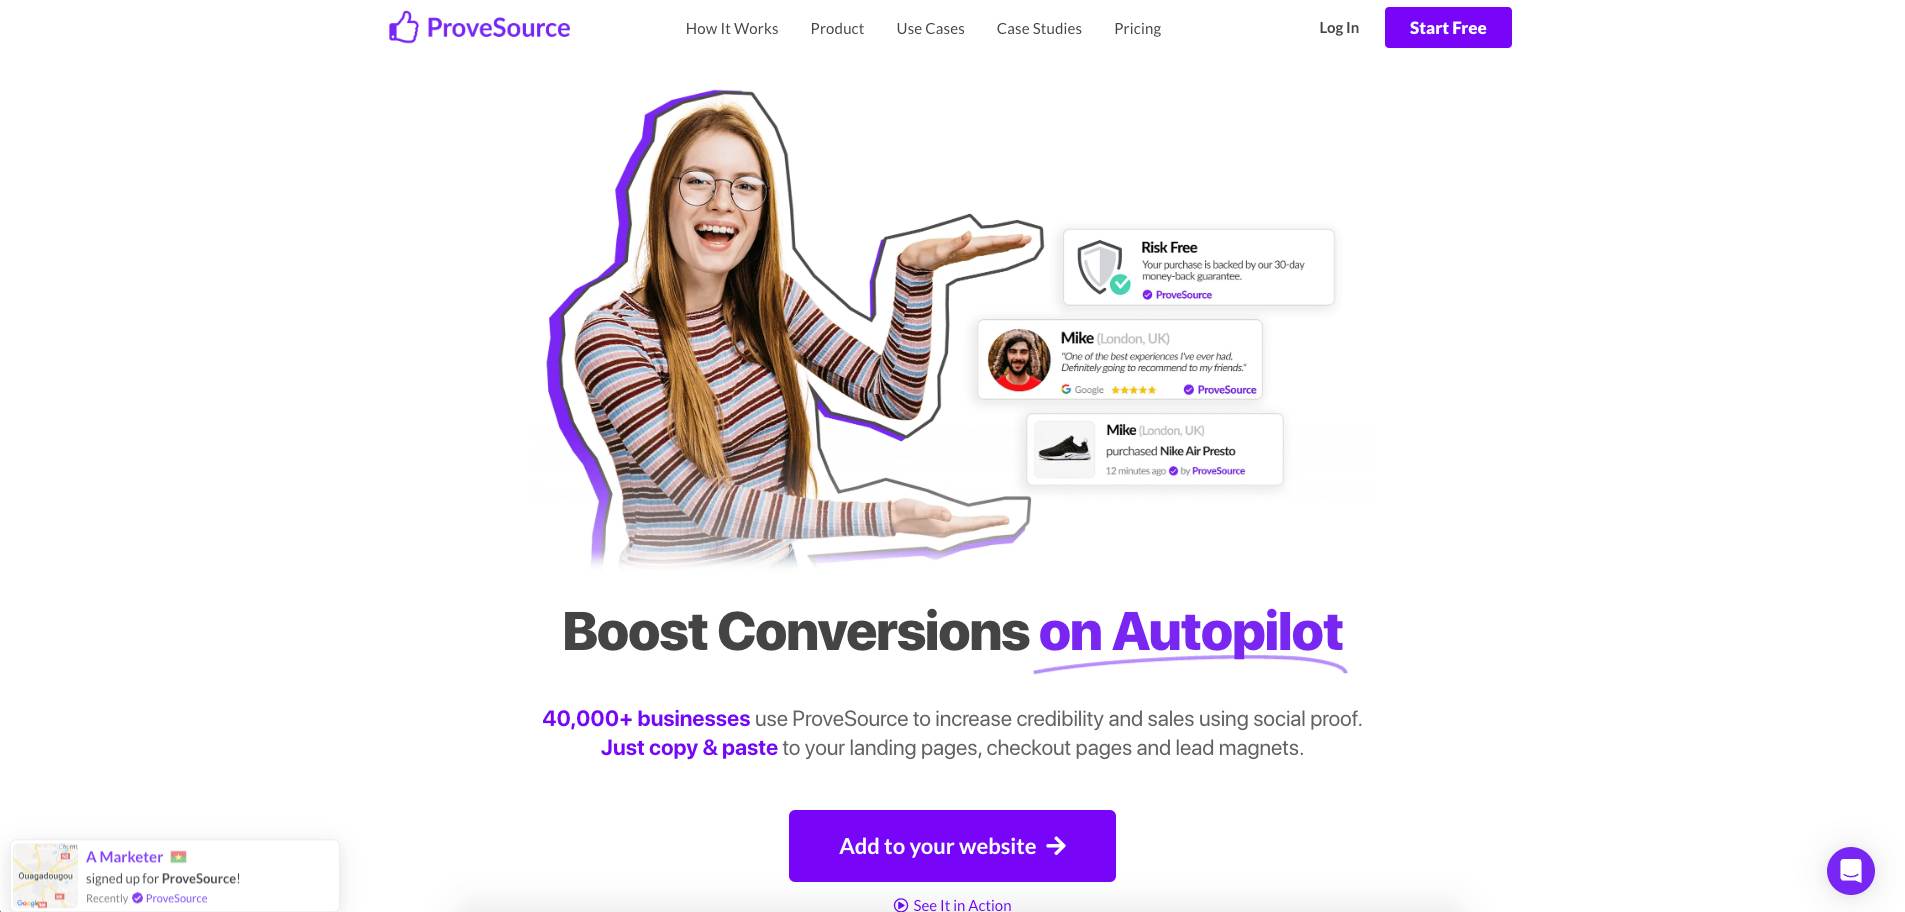 Provesouce Social proof tool